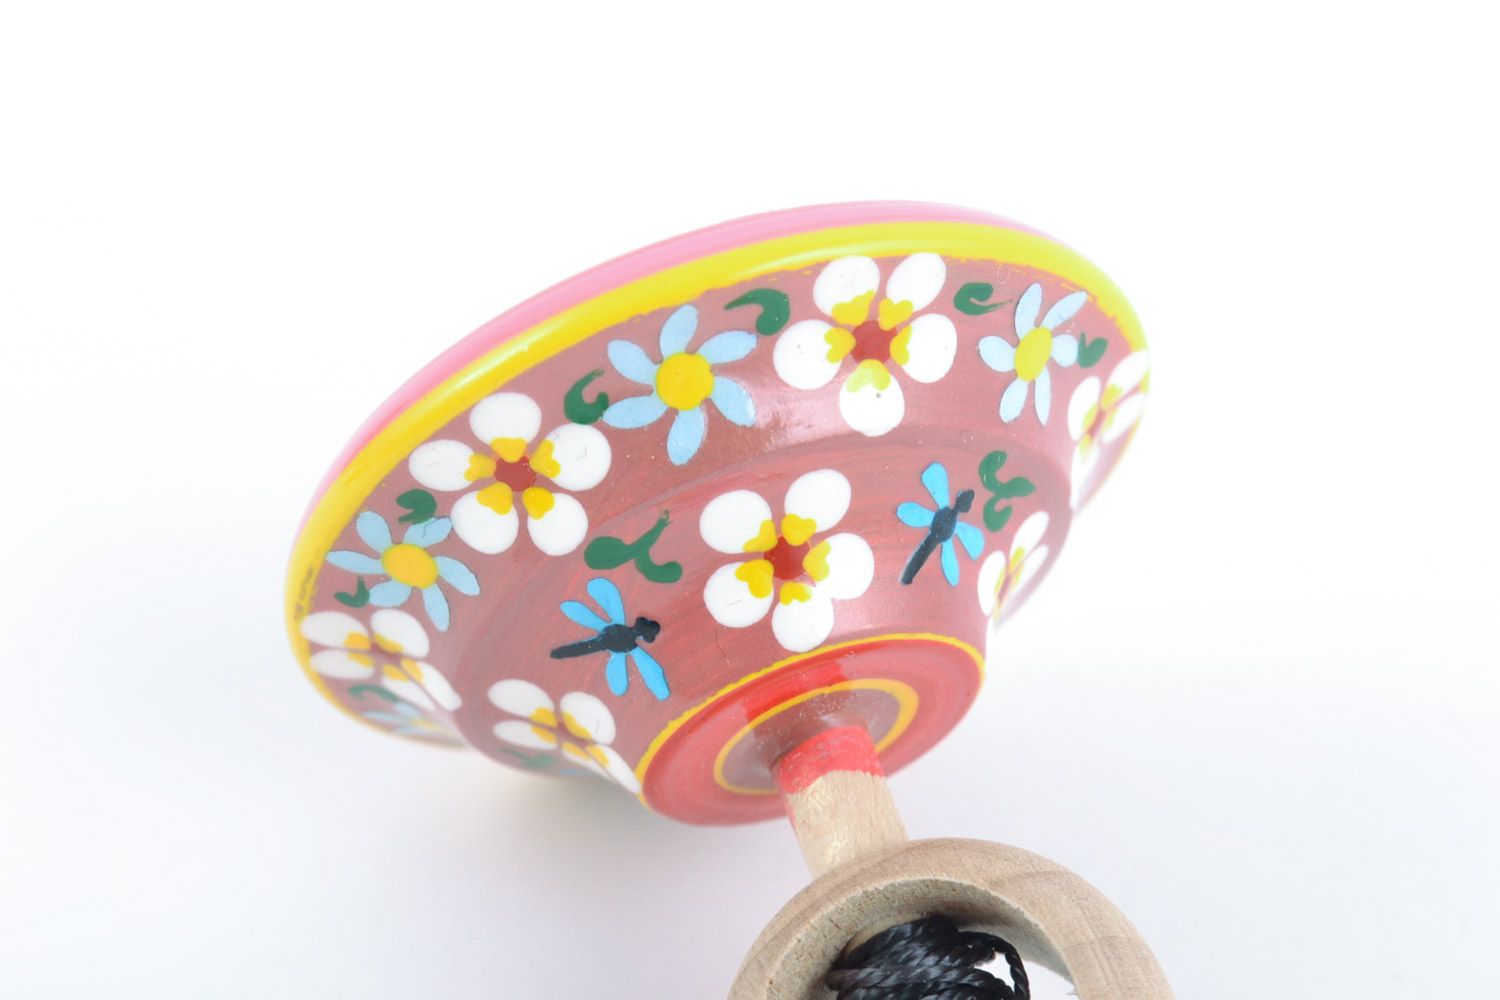 Homemade wooden eco toy spinning top painted in tender violet color palette photo 4